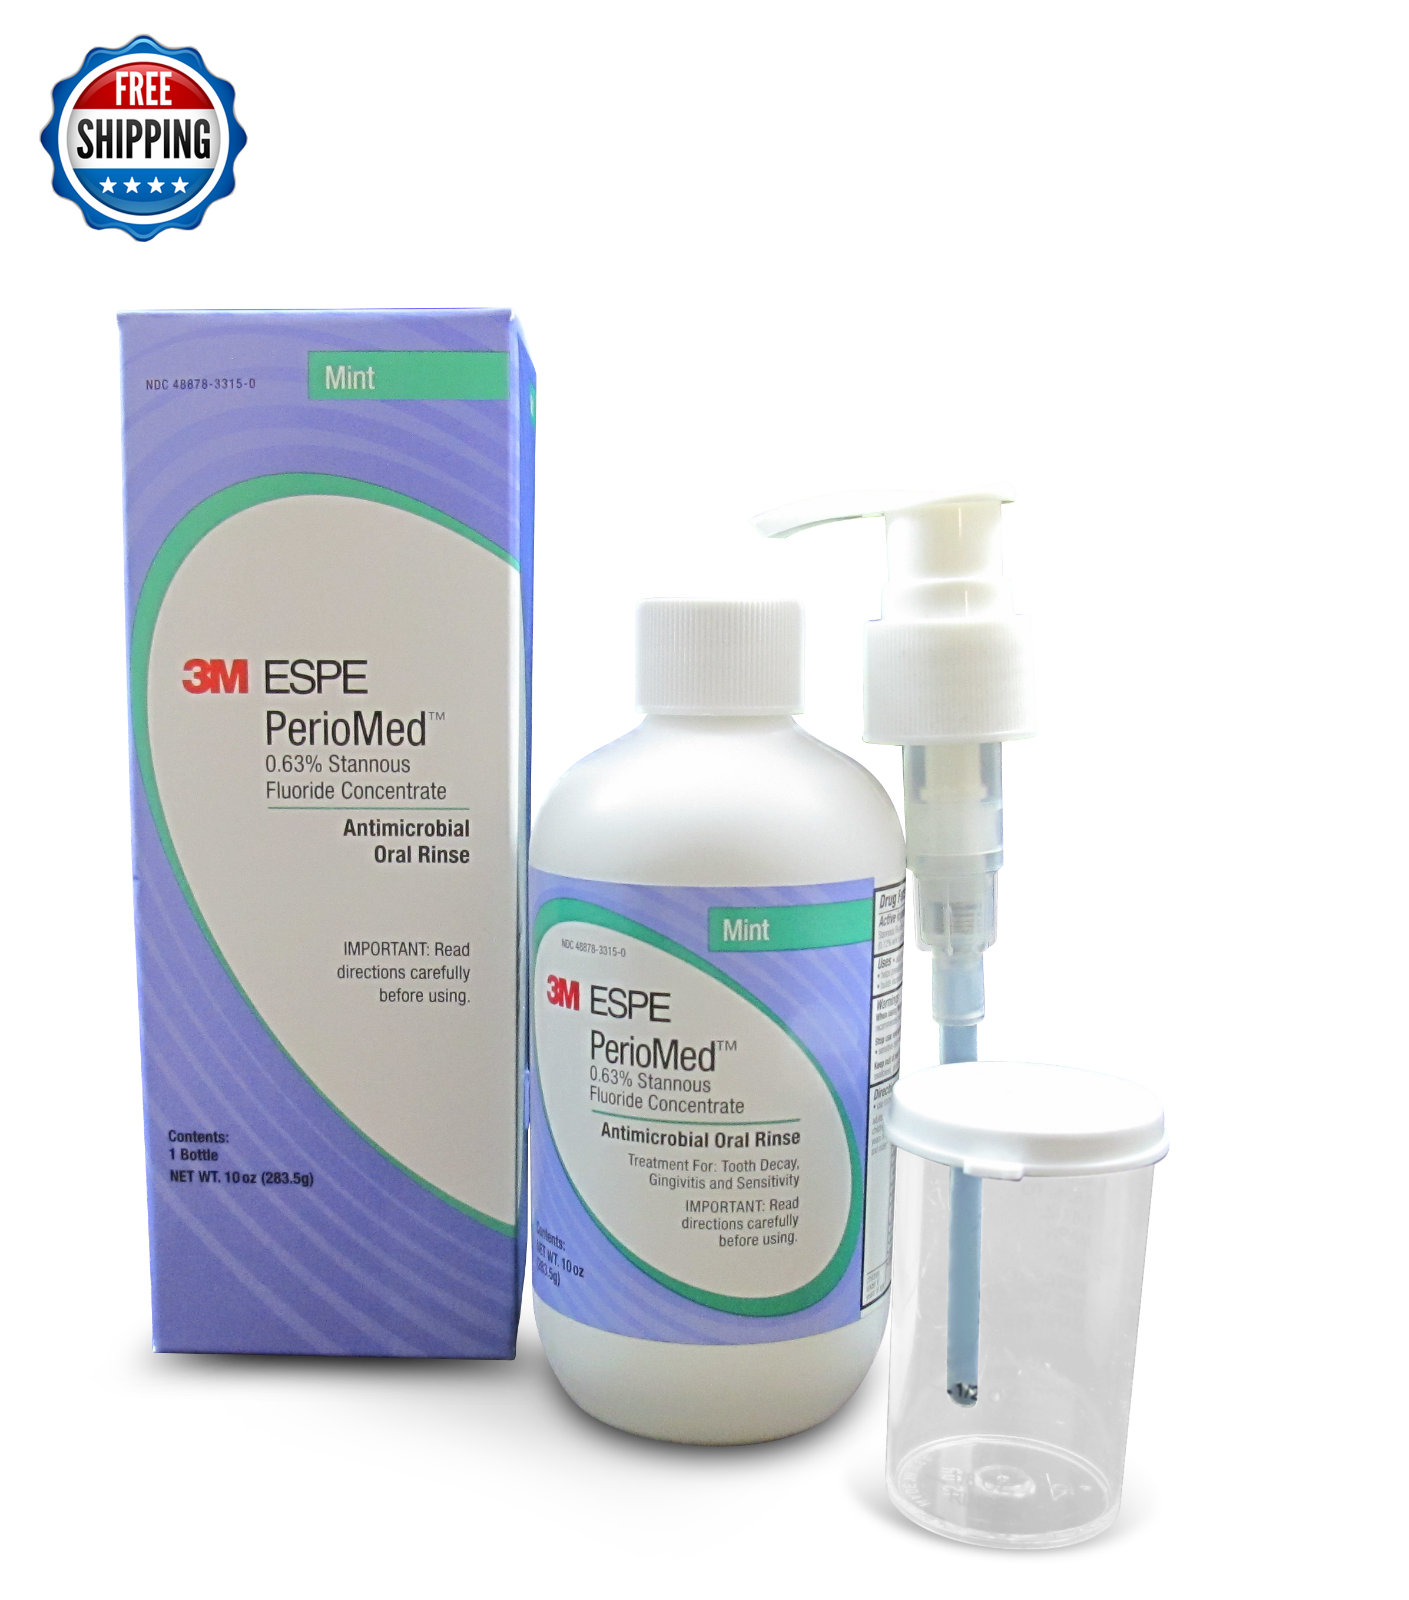 3m Espe Periomed 0.63% Stannous Fluoride Antimicrobial Oral Rinse Mouthwash Mint